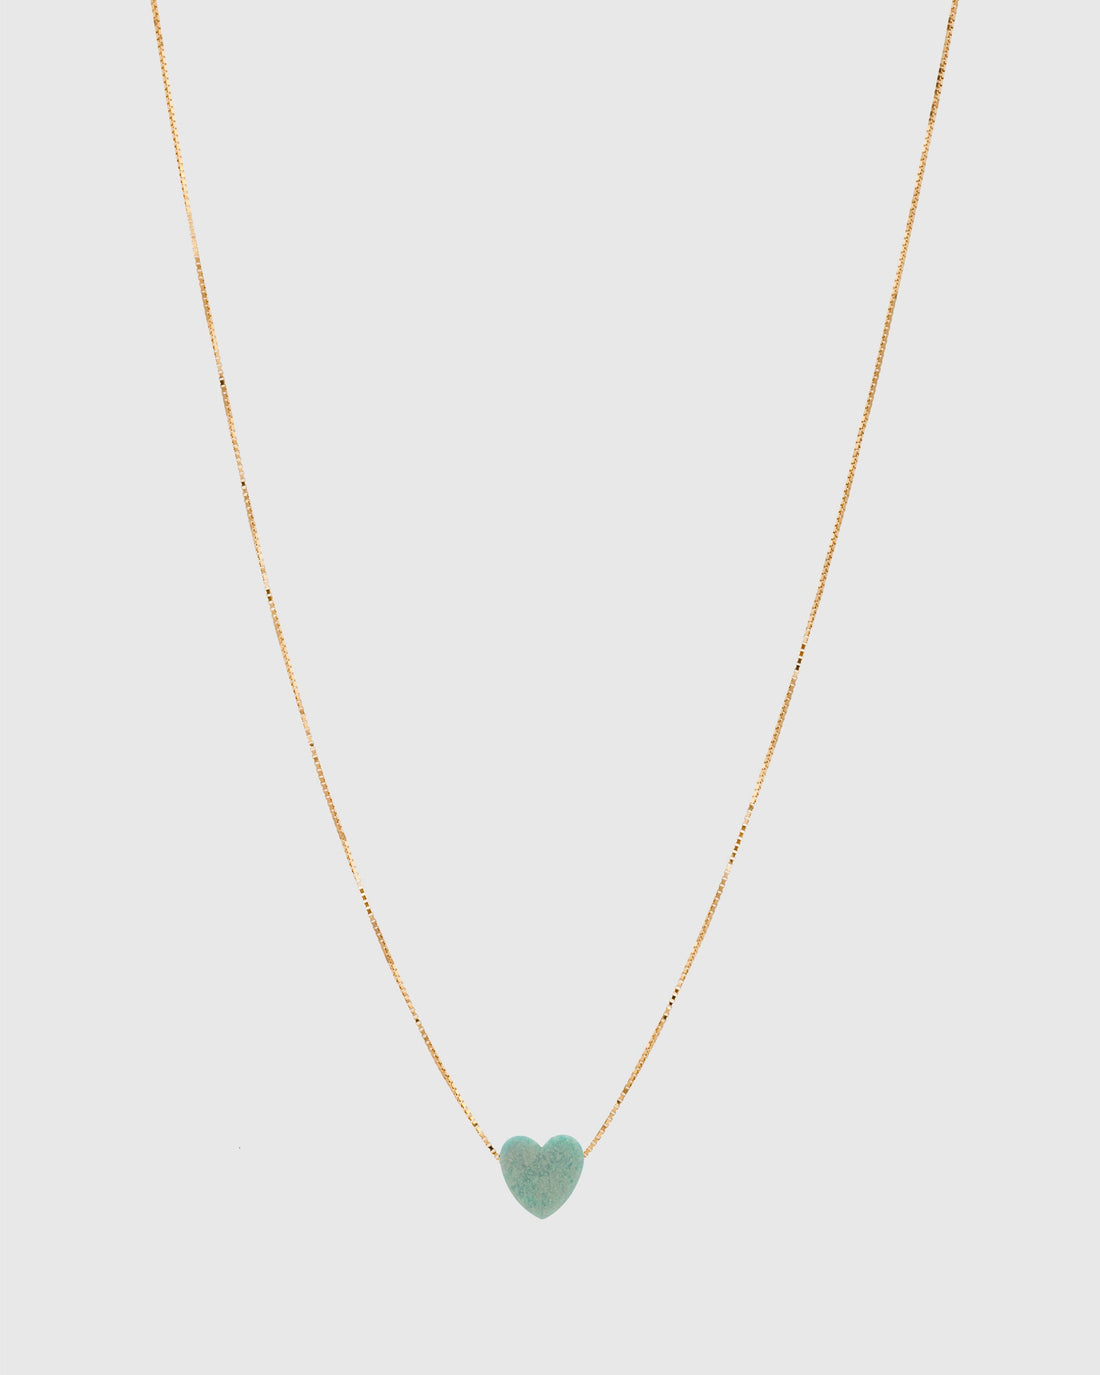 Teal Opal Heart Necklace